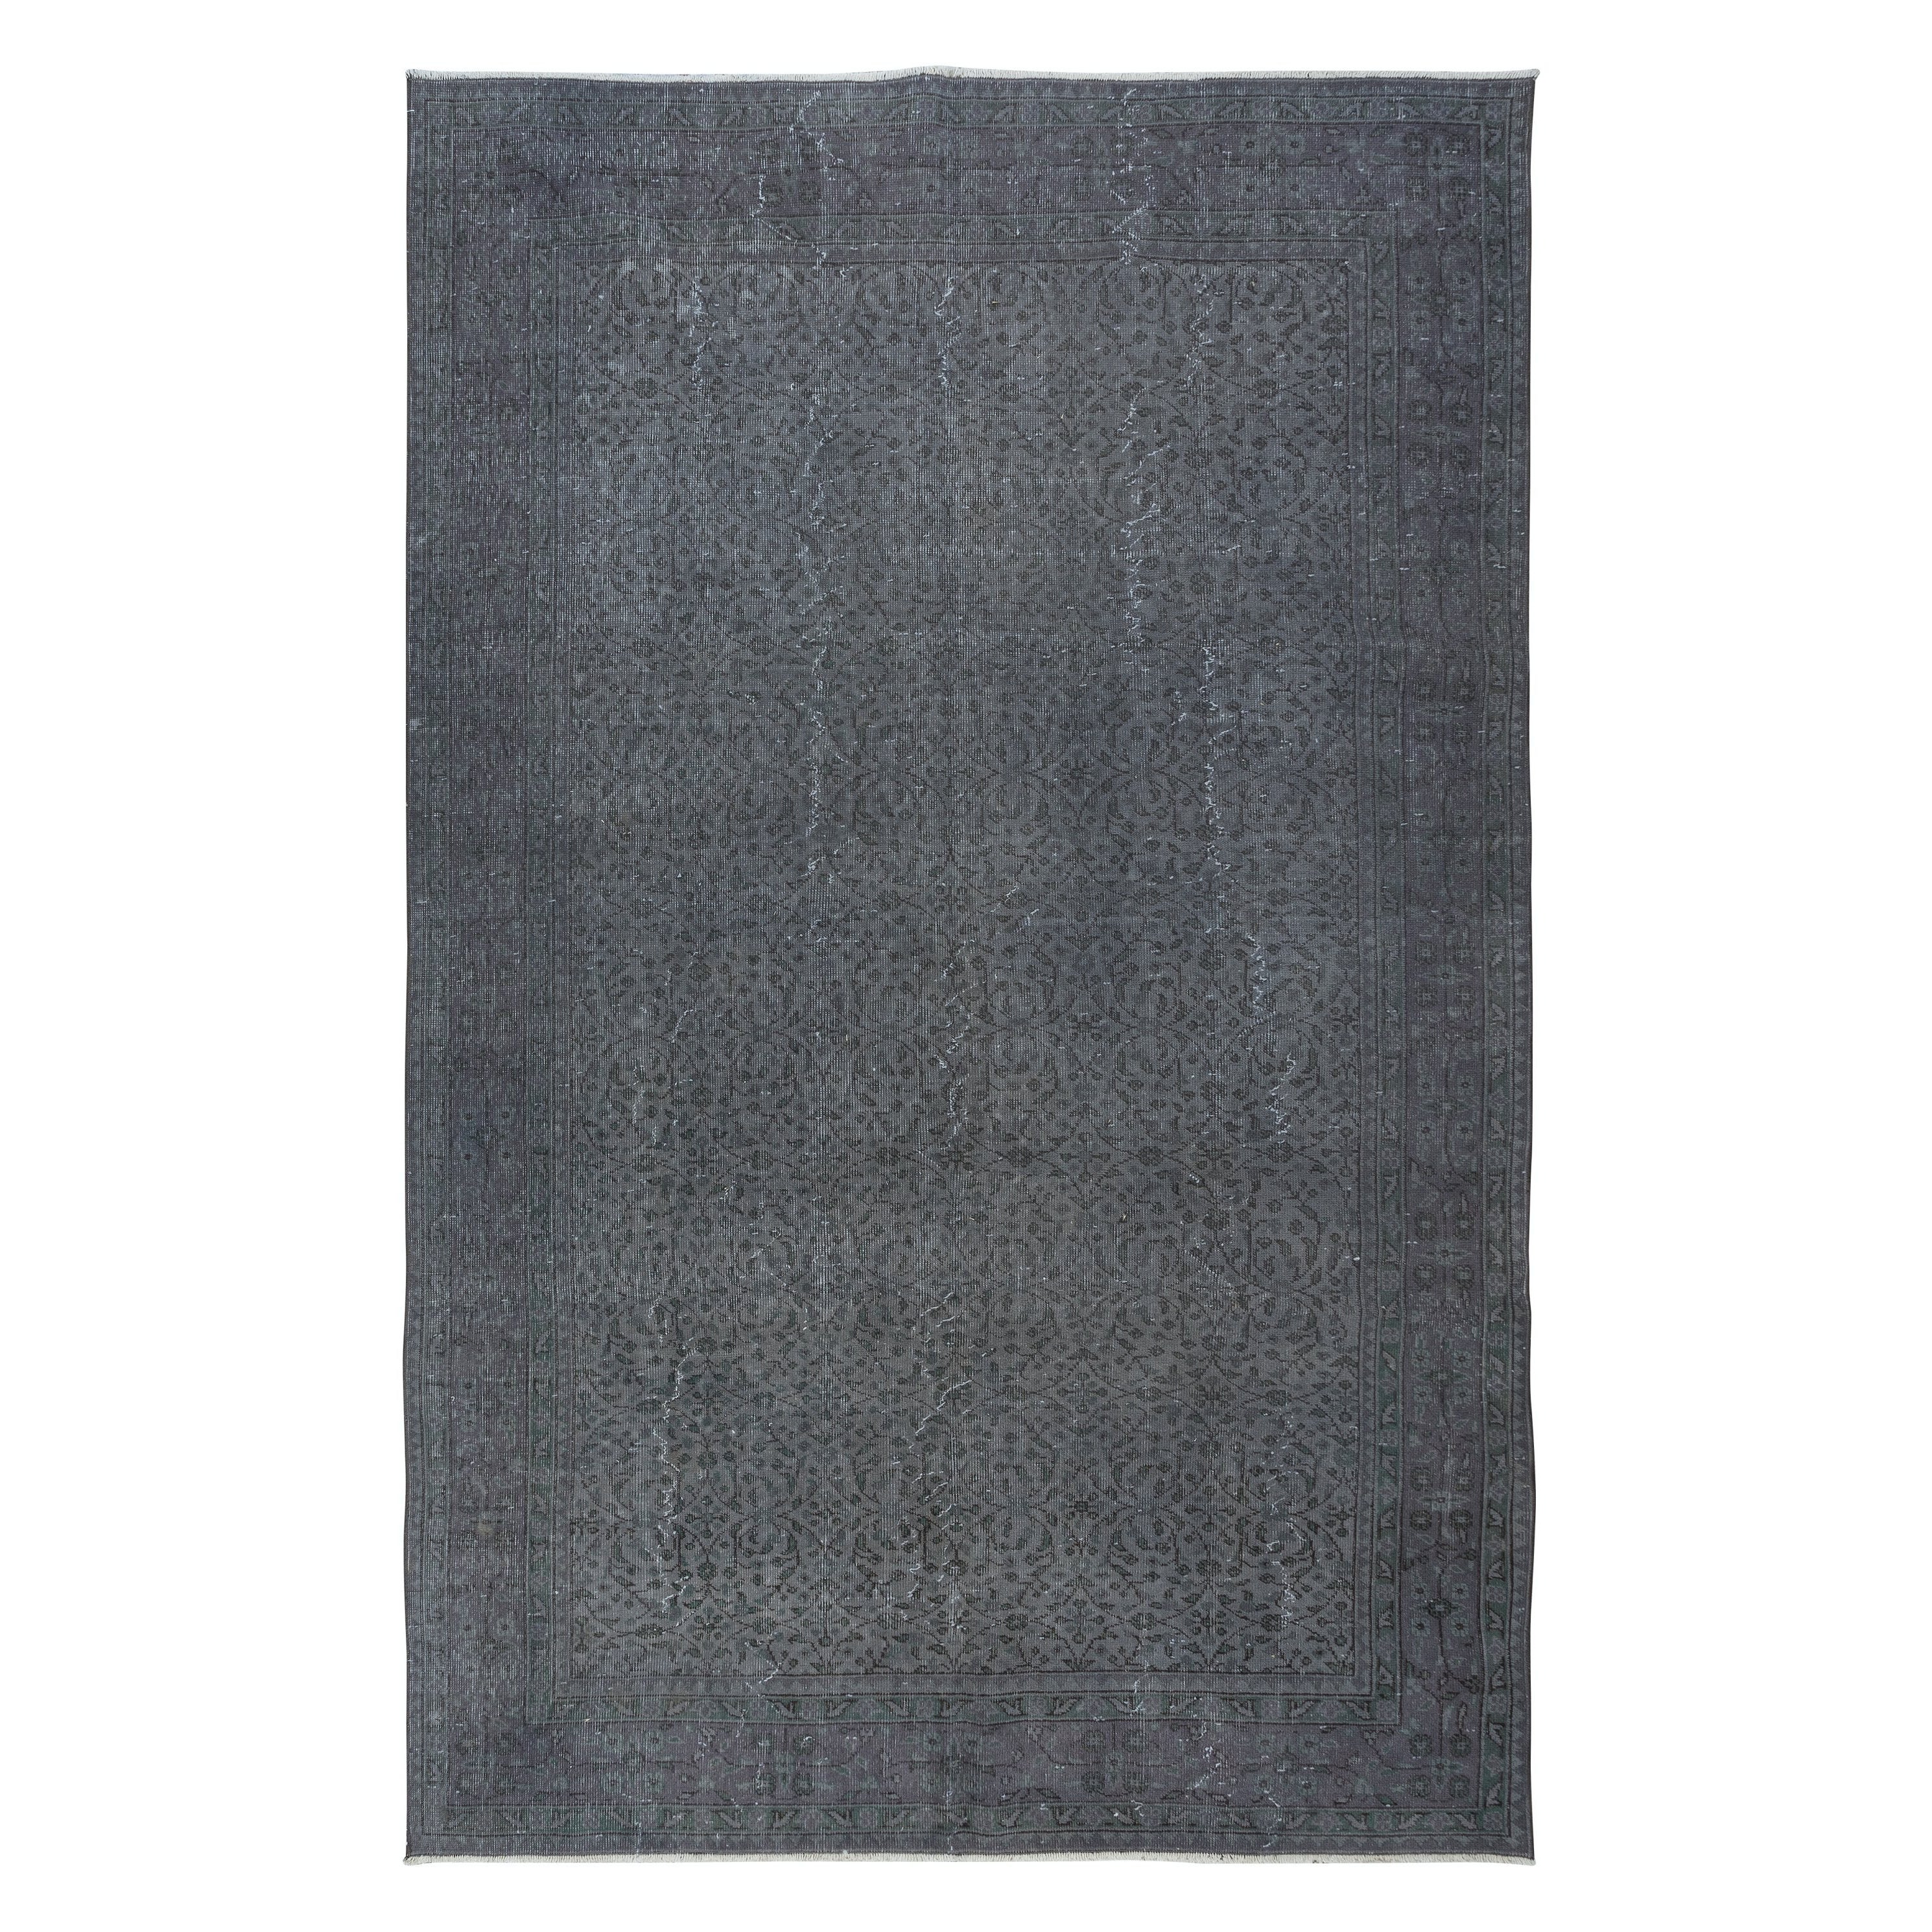 6.7x10.4 Ft Handmade Turkish Area Rug in Gray, Ideal for Modern Home and Office